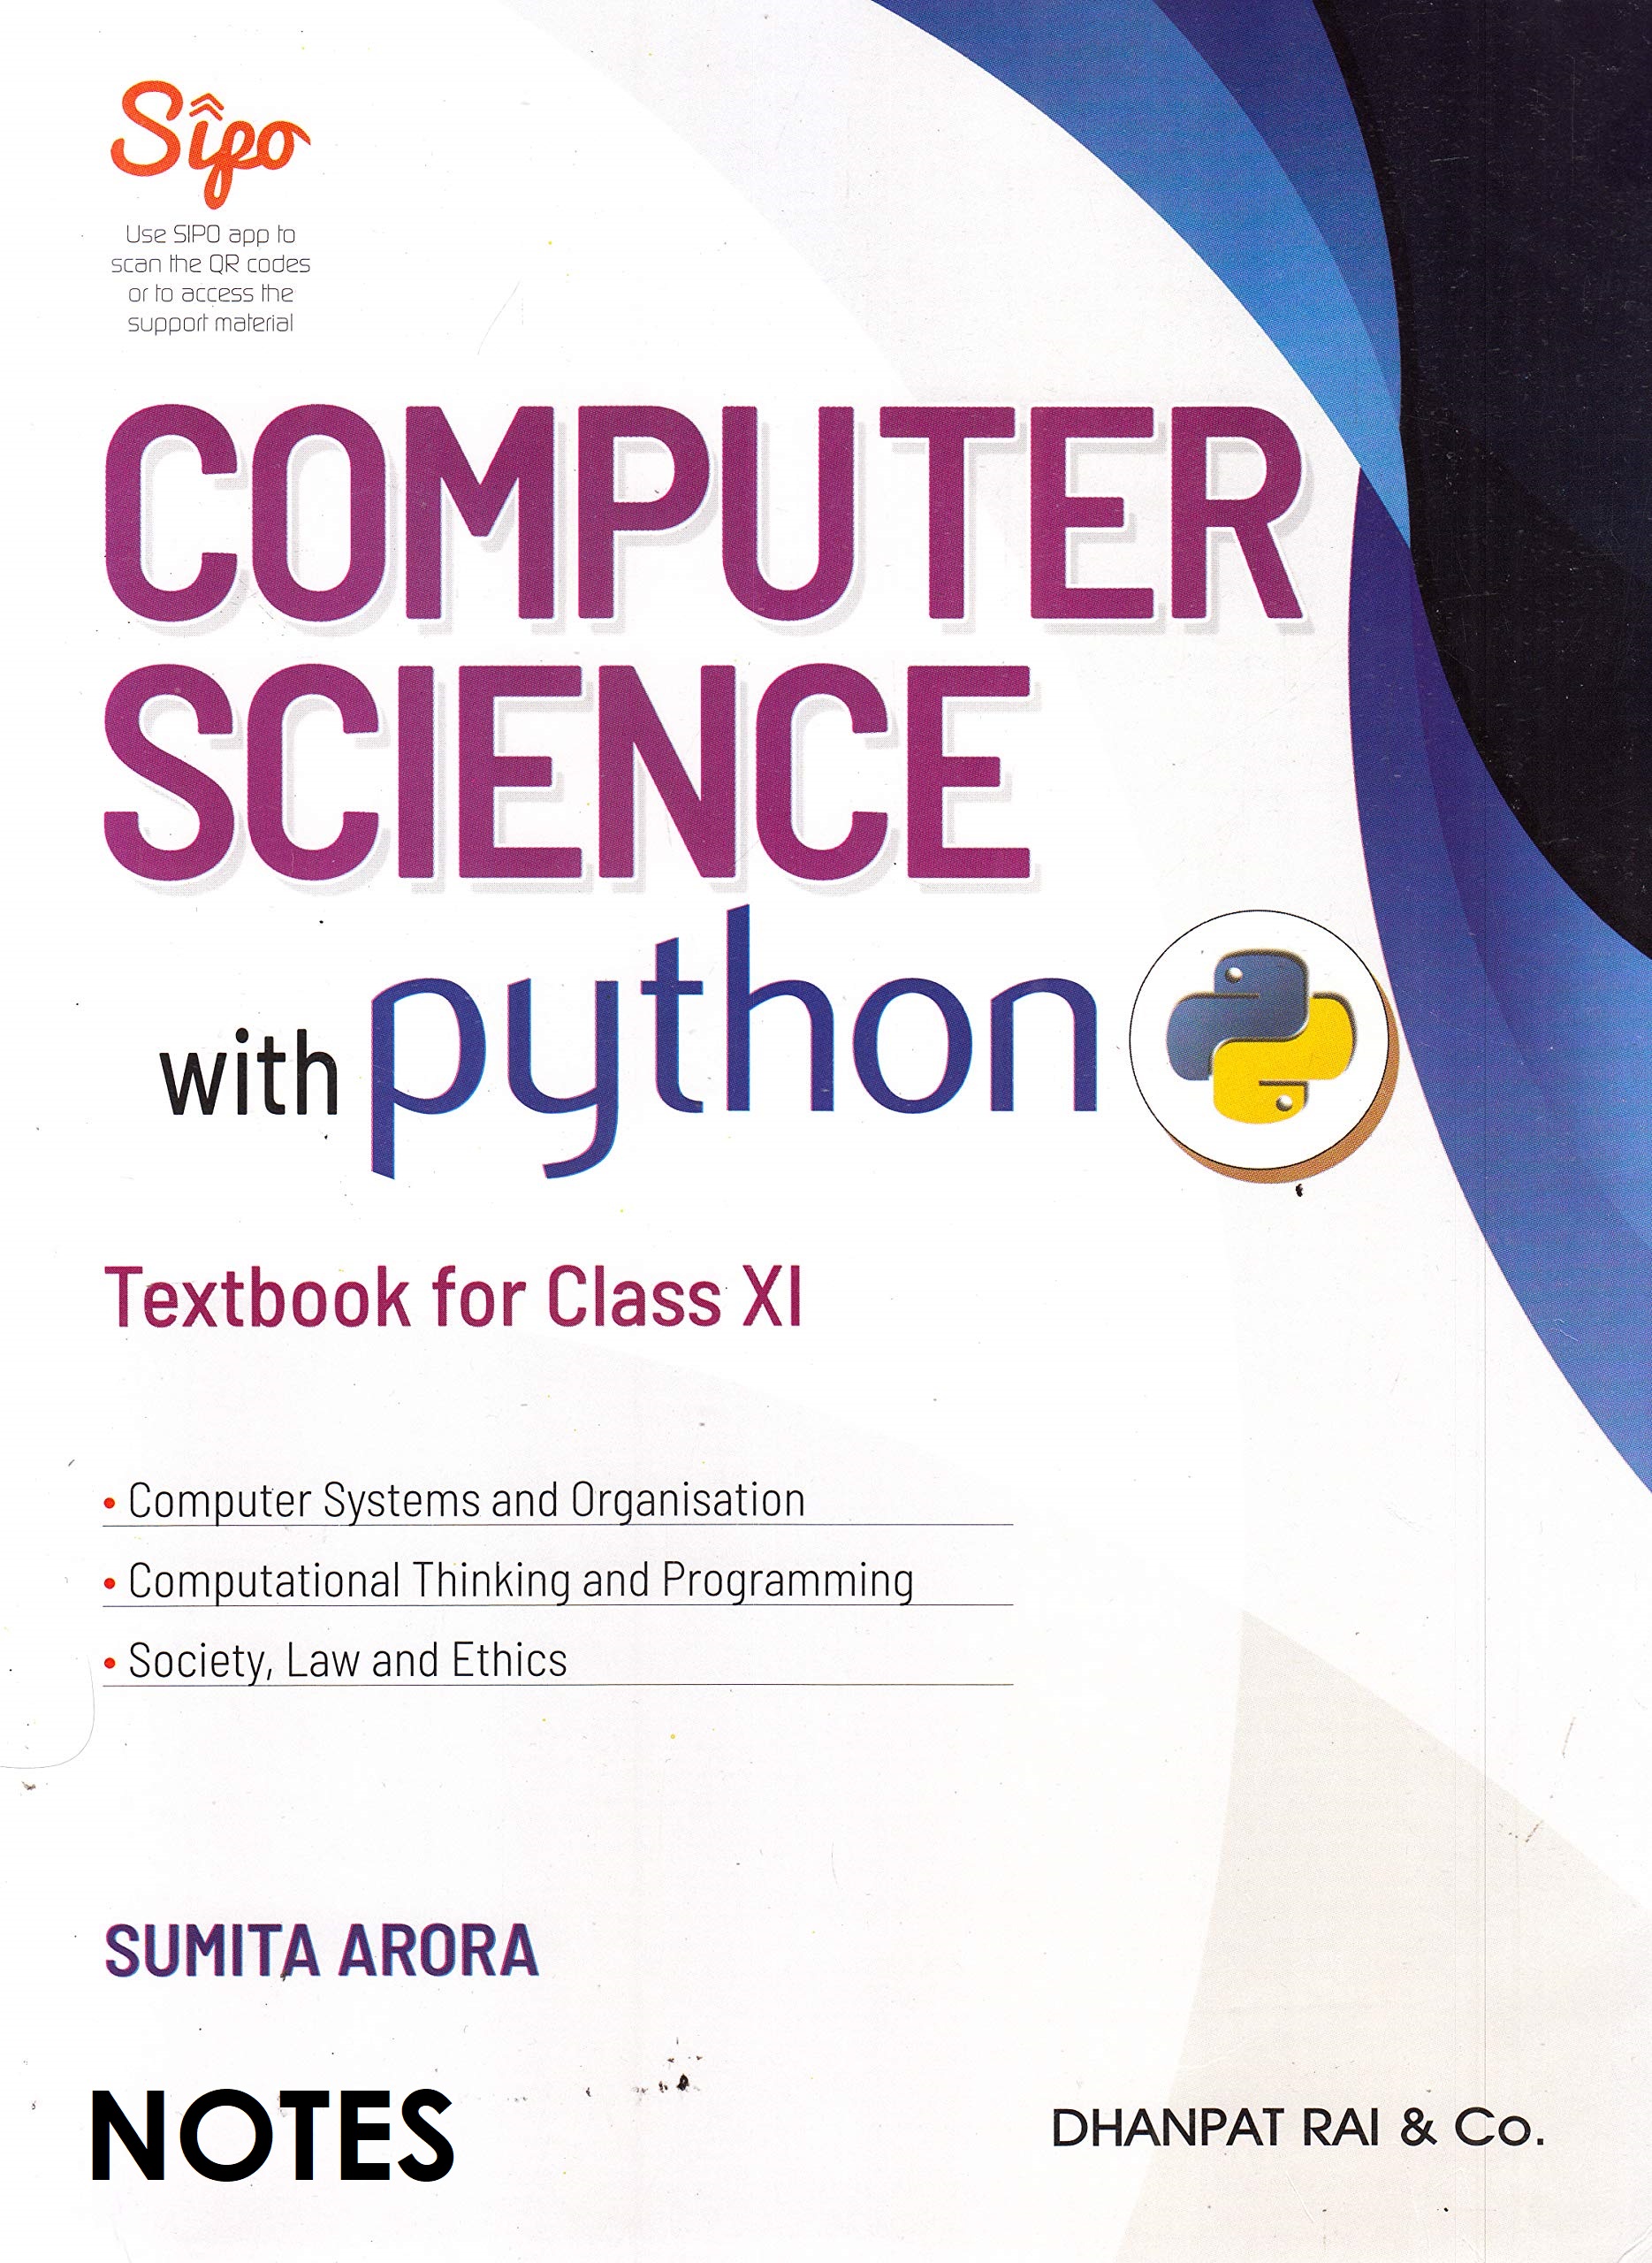 Class 11th COMPUTER SCIENCE